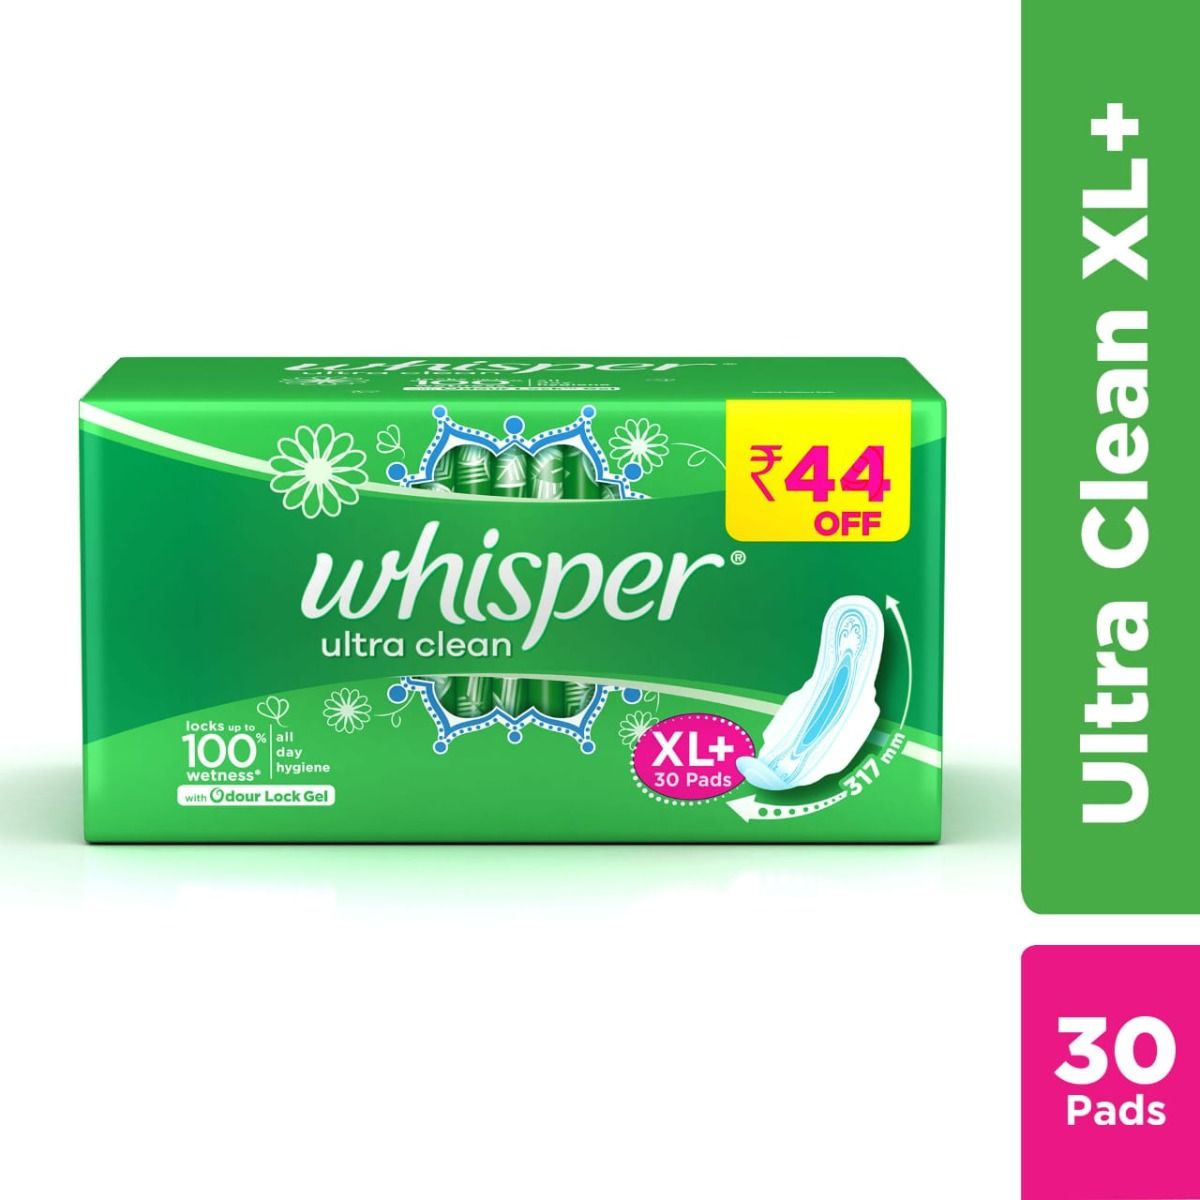 Whisper Ultra Clean Wings Sanitary Pads XL+, 30 Count, Pack of 1 